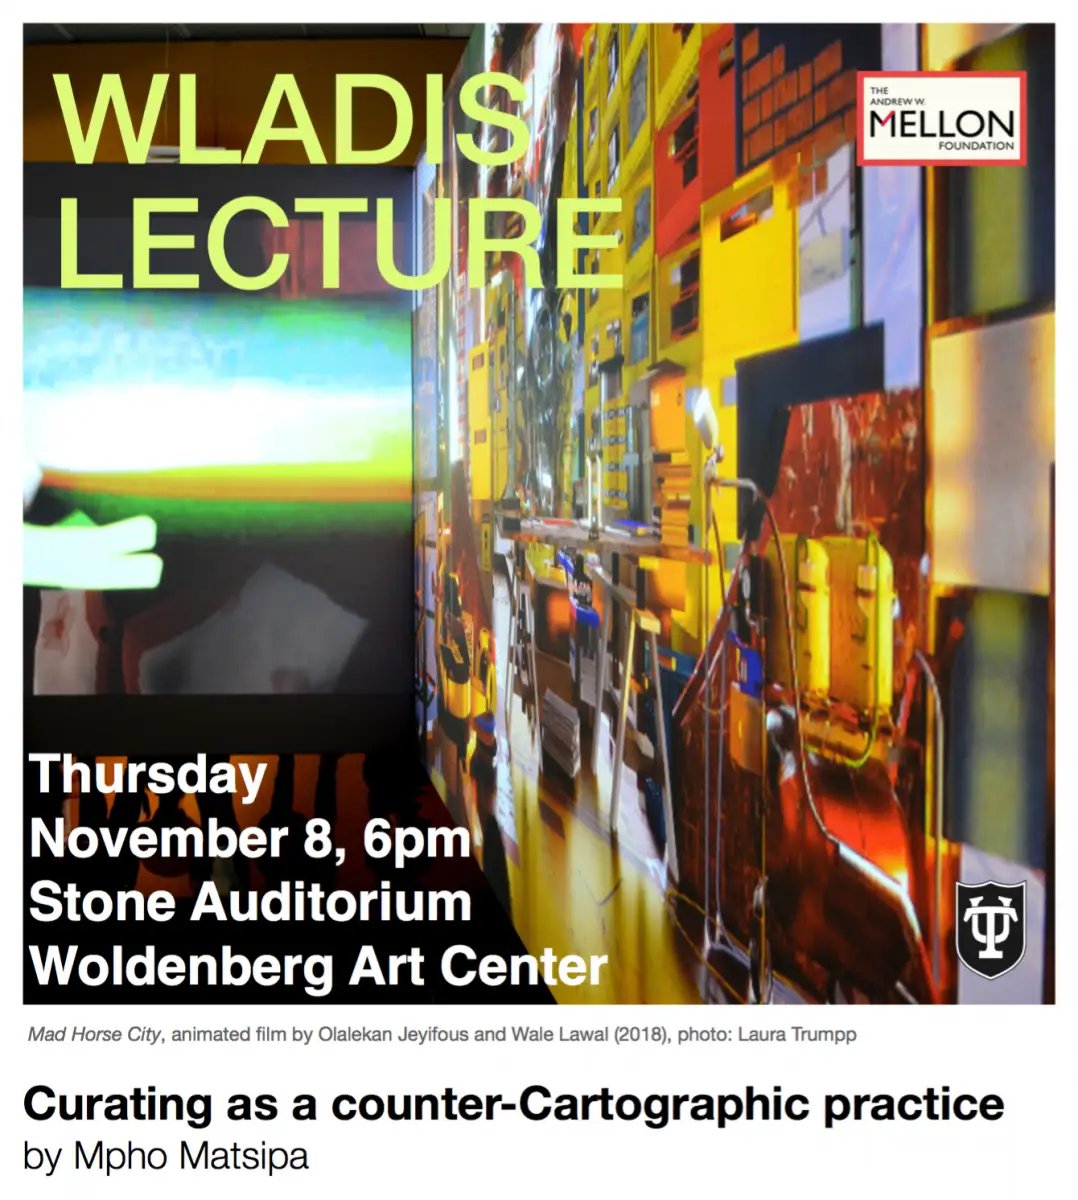 Wladis Lecture event poster